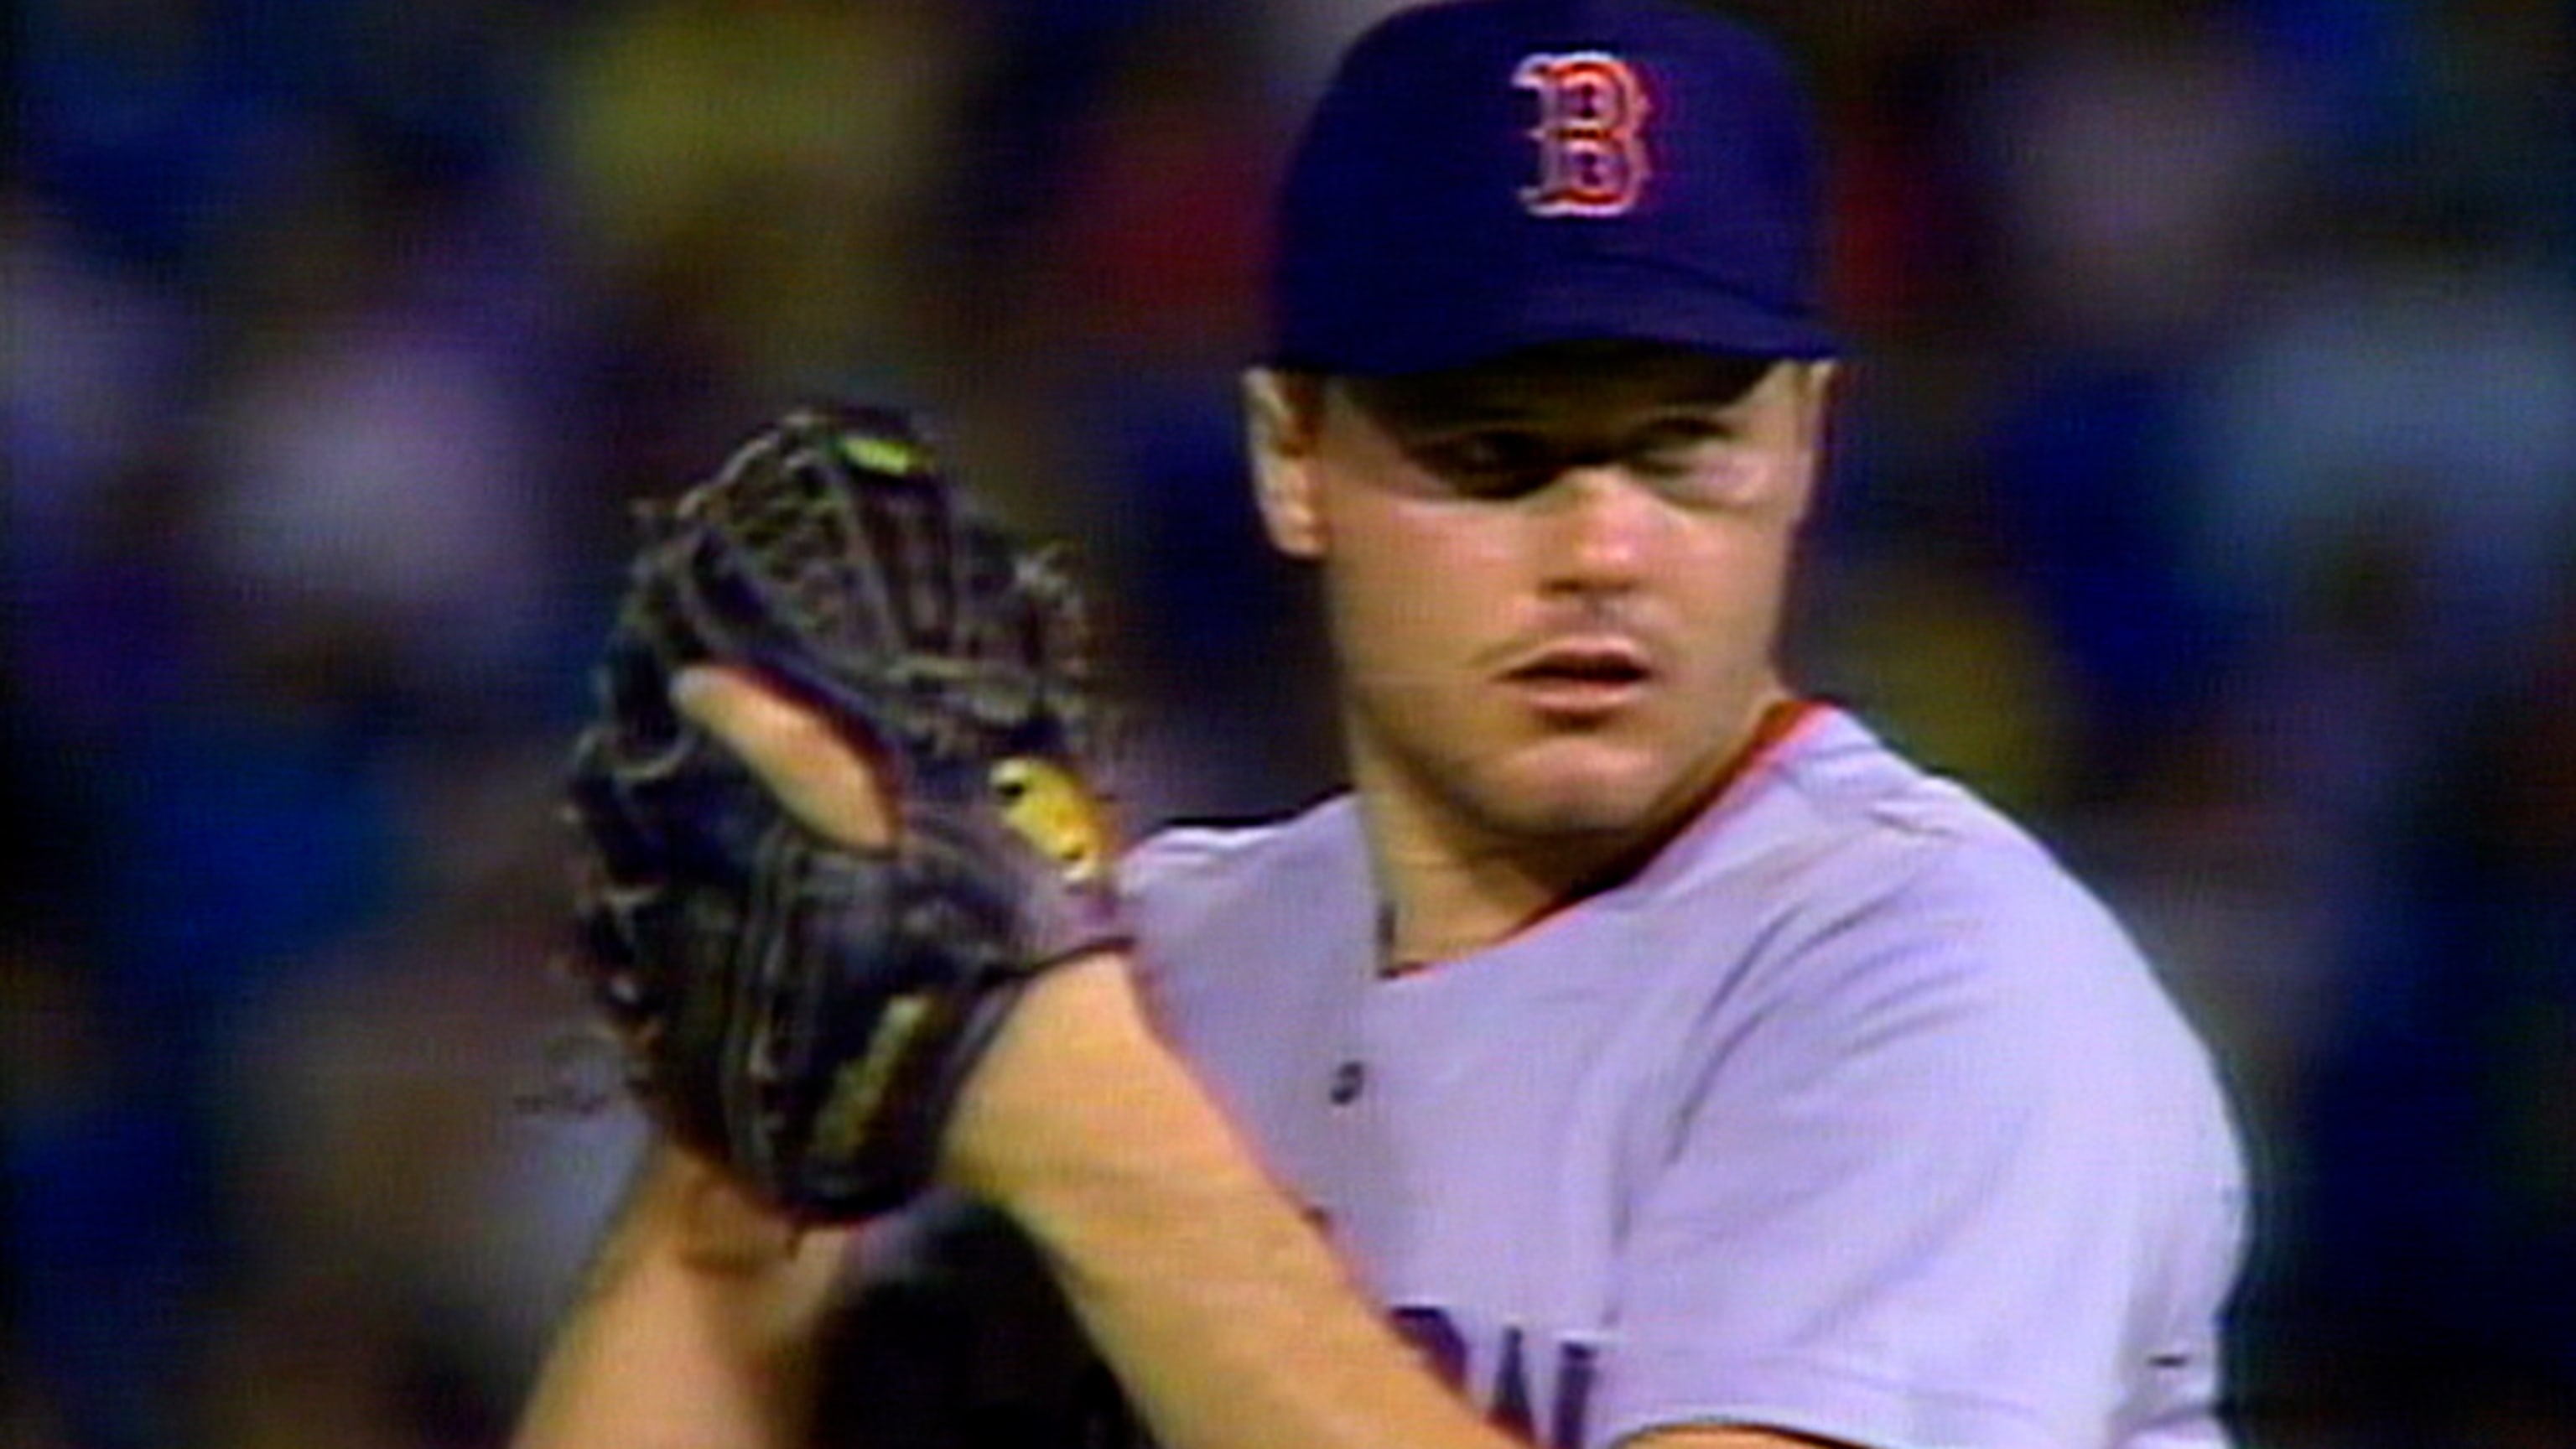 Roger Clemens among former MLB players to play in NBC World Series